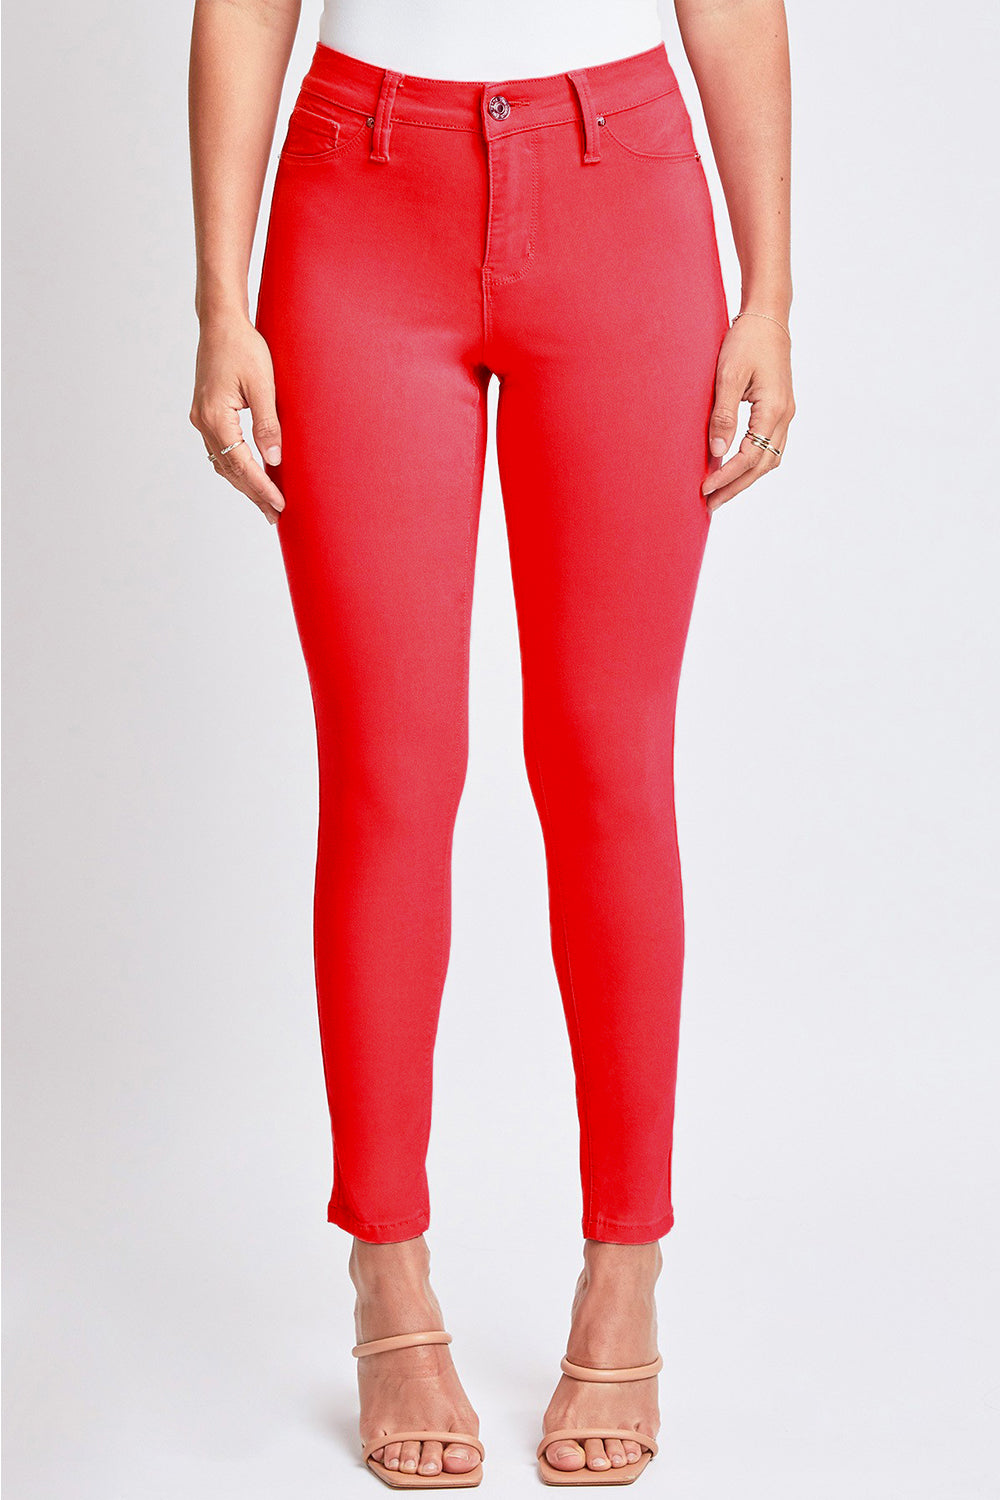 Stretch Mid-Rise Skinny Jeans for Women | Jeans | Ro + Ivy